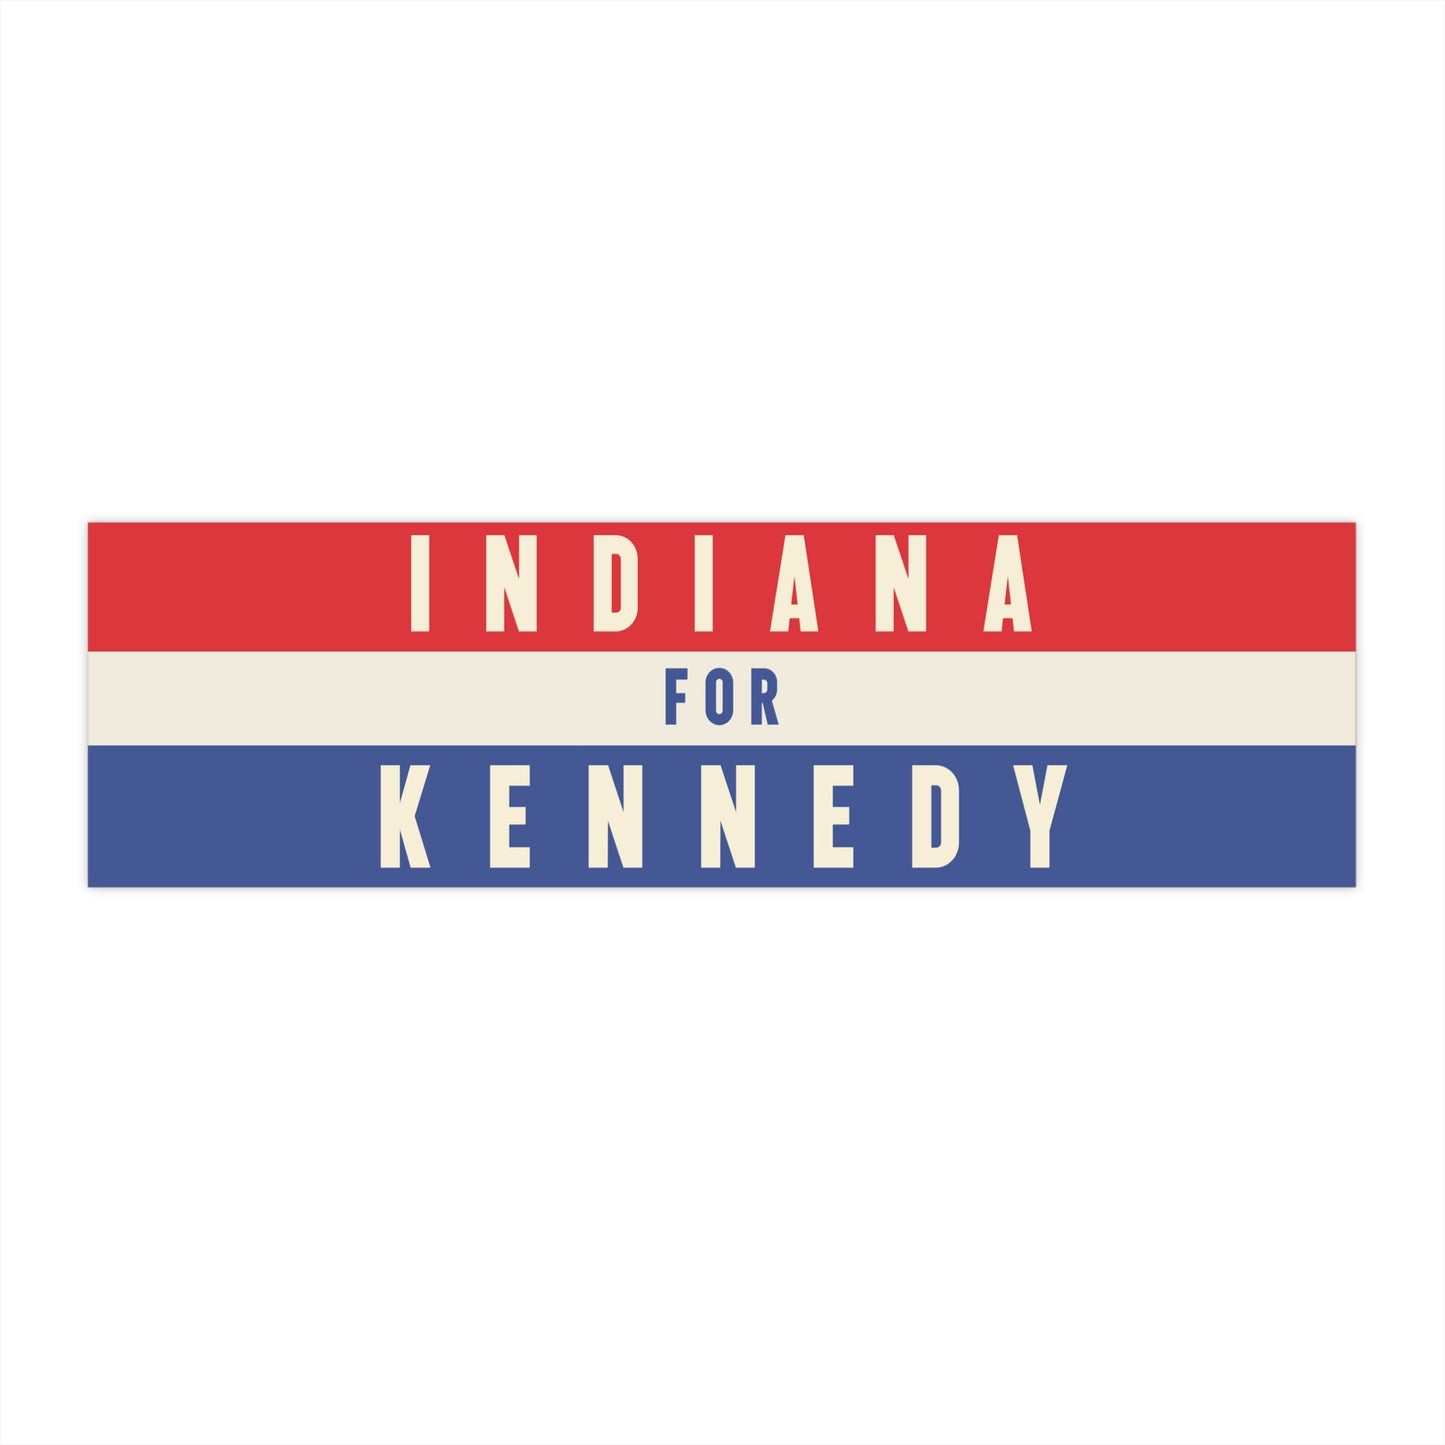 Indiana for Kennedy Bumper Sticker - TEAM KENNEDY. All rights reserved